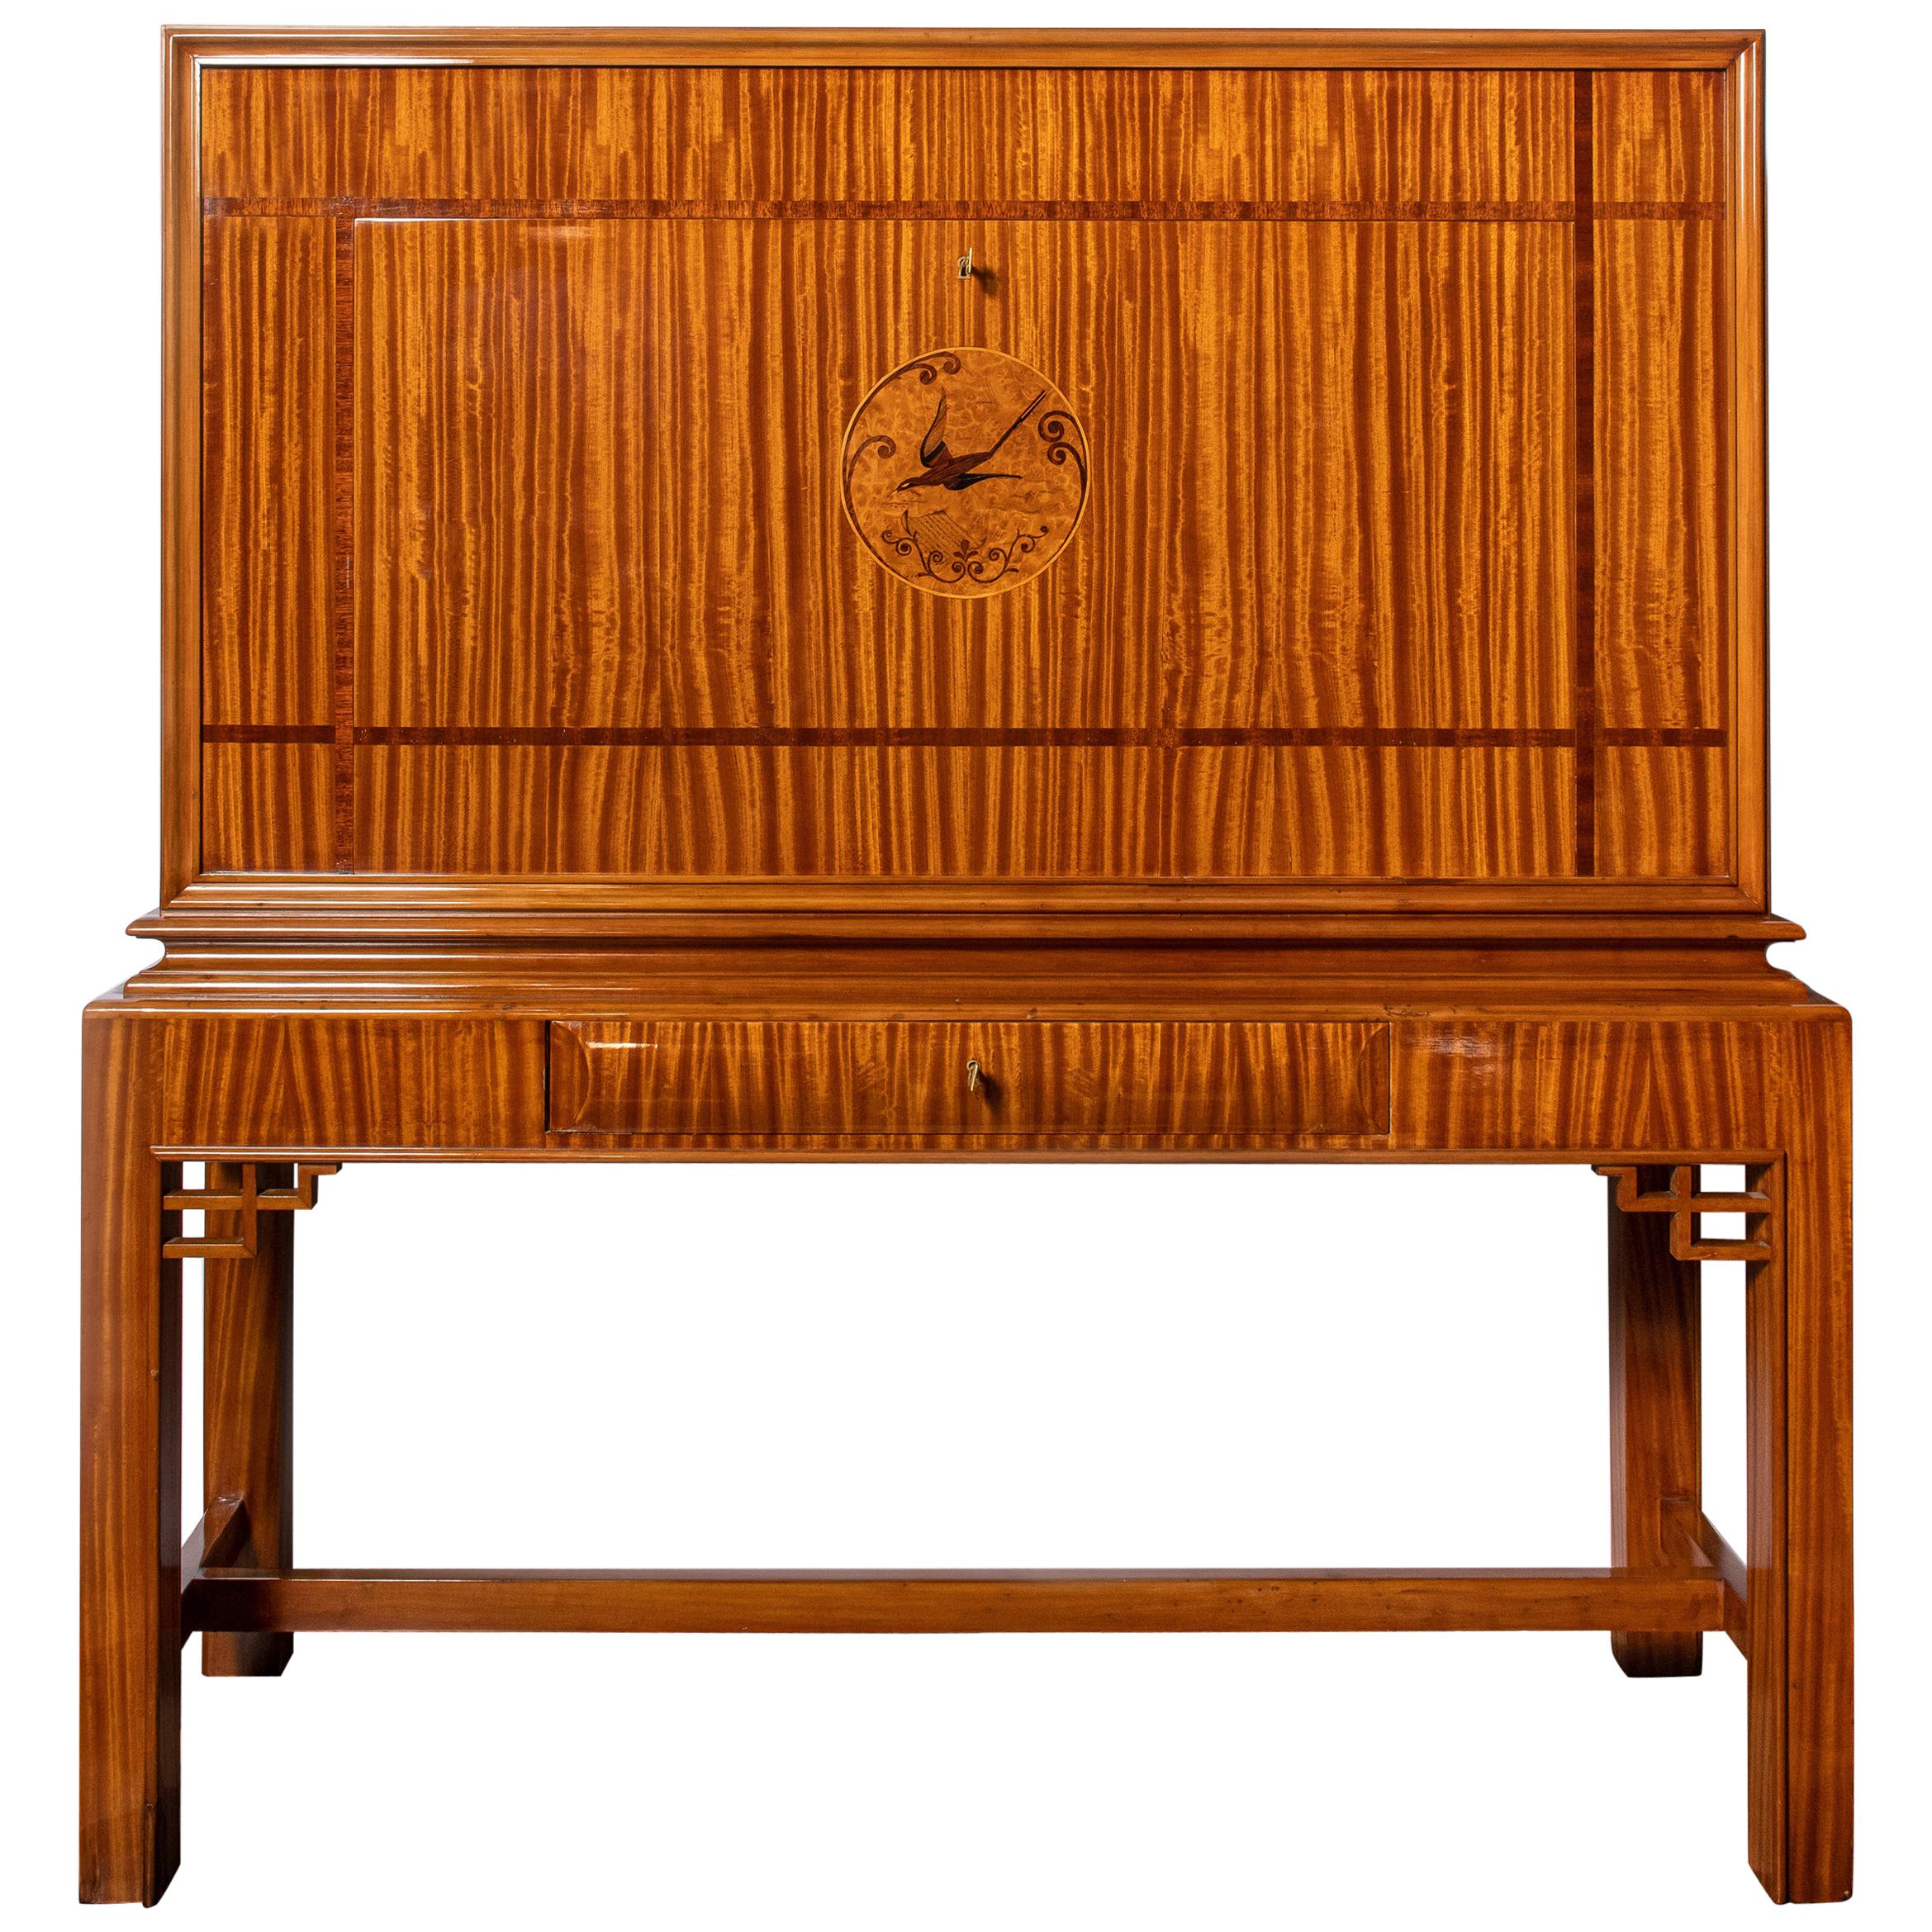 Citronnier Wood and Marquetry Secretaire by Englander & Bonta, Argentina, 1950